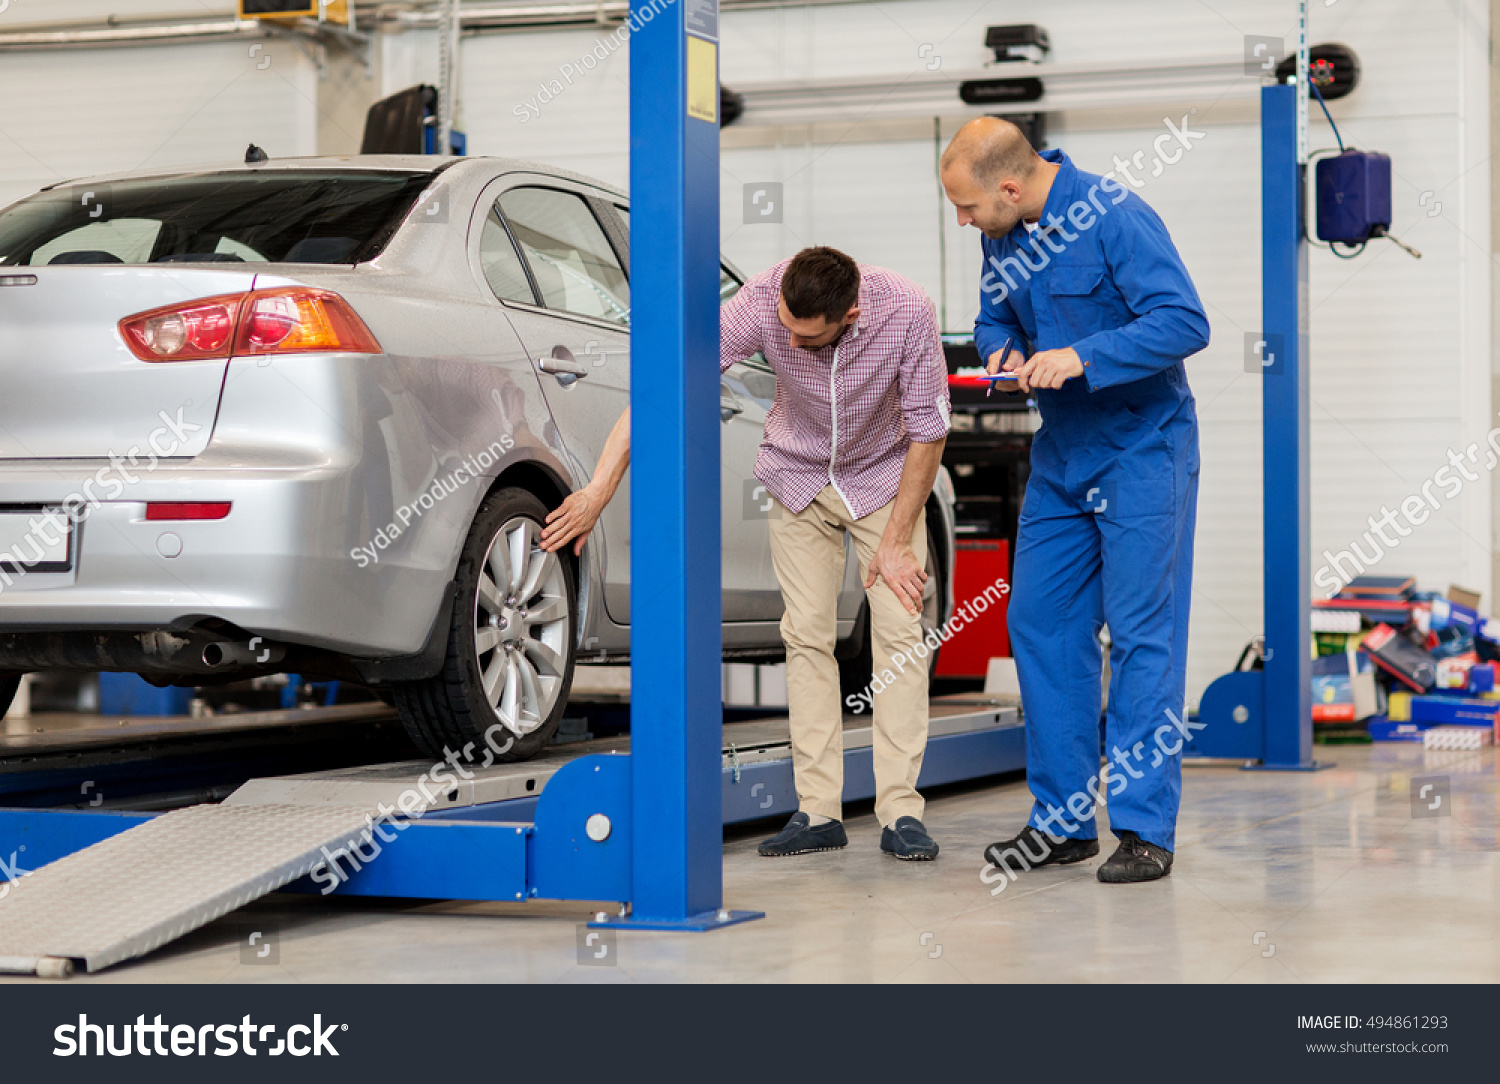 auto service, repair, maintenance and people concept - mechanic with clipboard and man or owner showing wheel at car shop #494861293